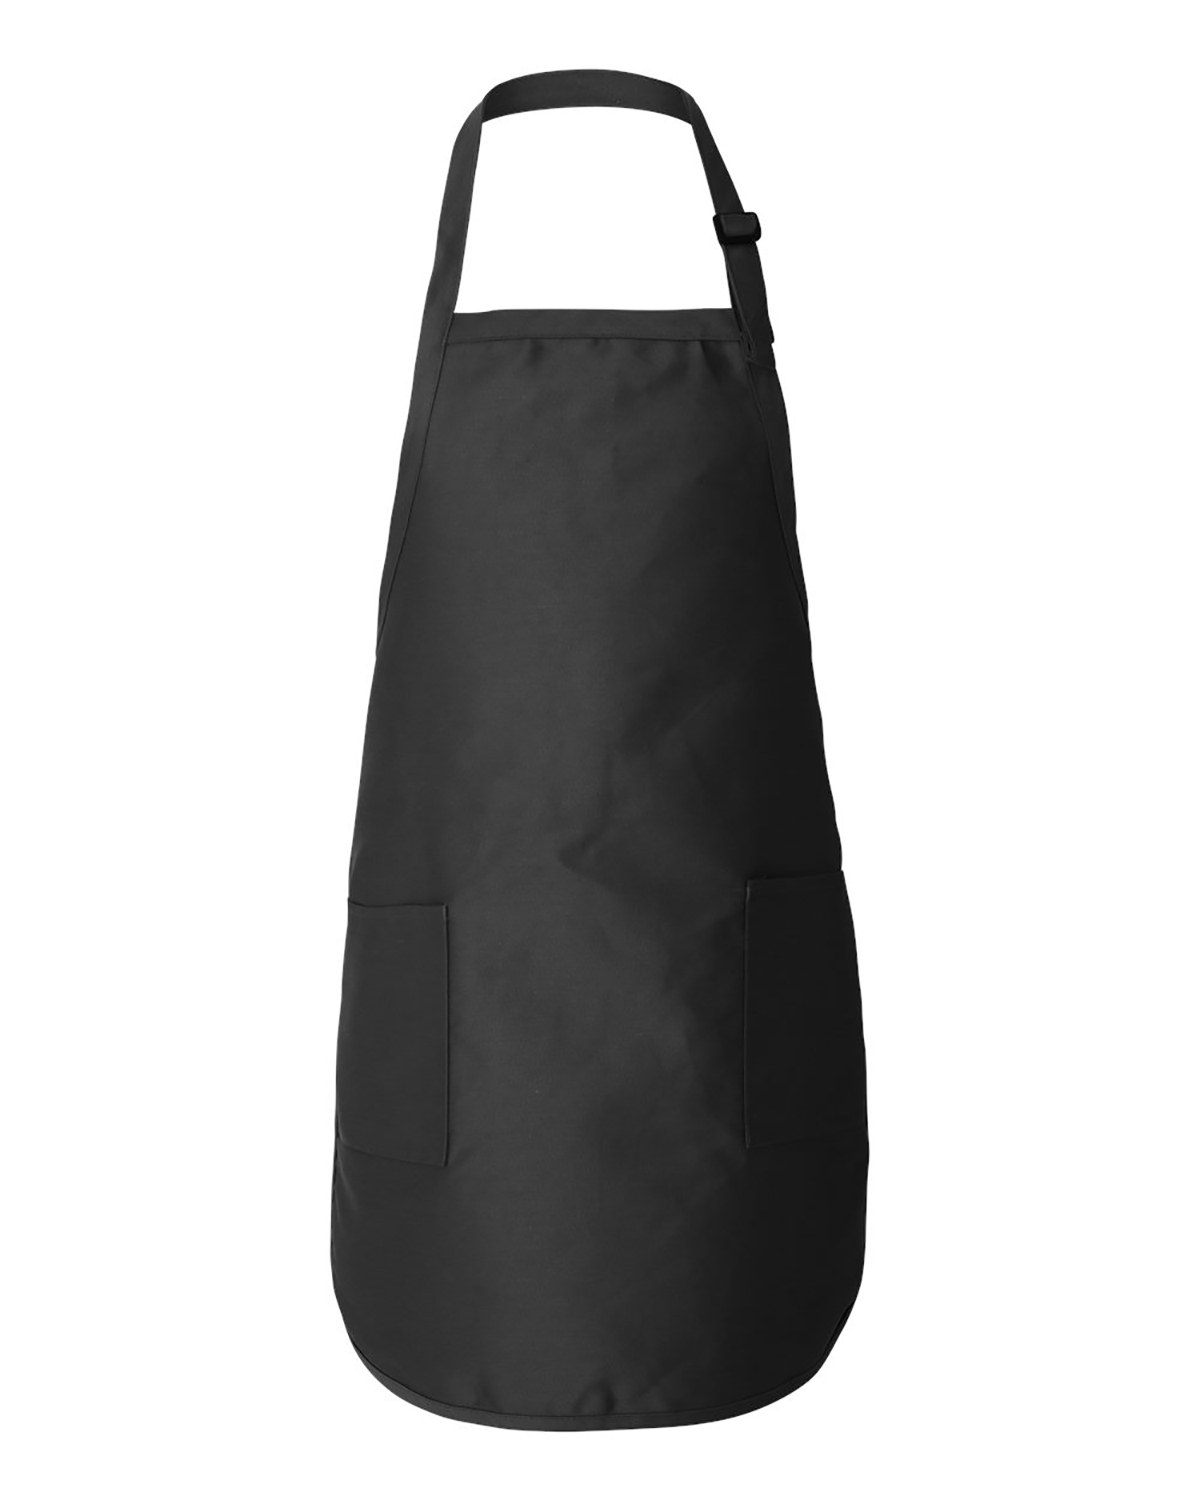 'Q-Tees Q4350 Full-Length Apron with Pockets'